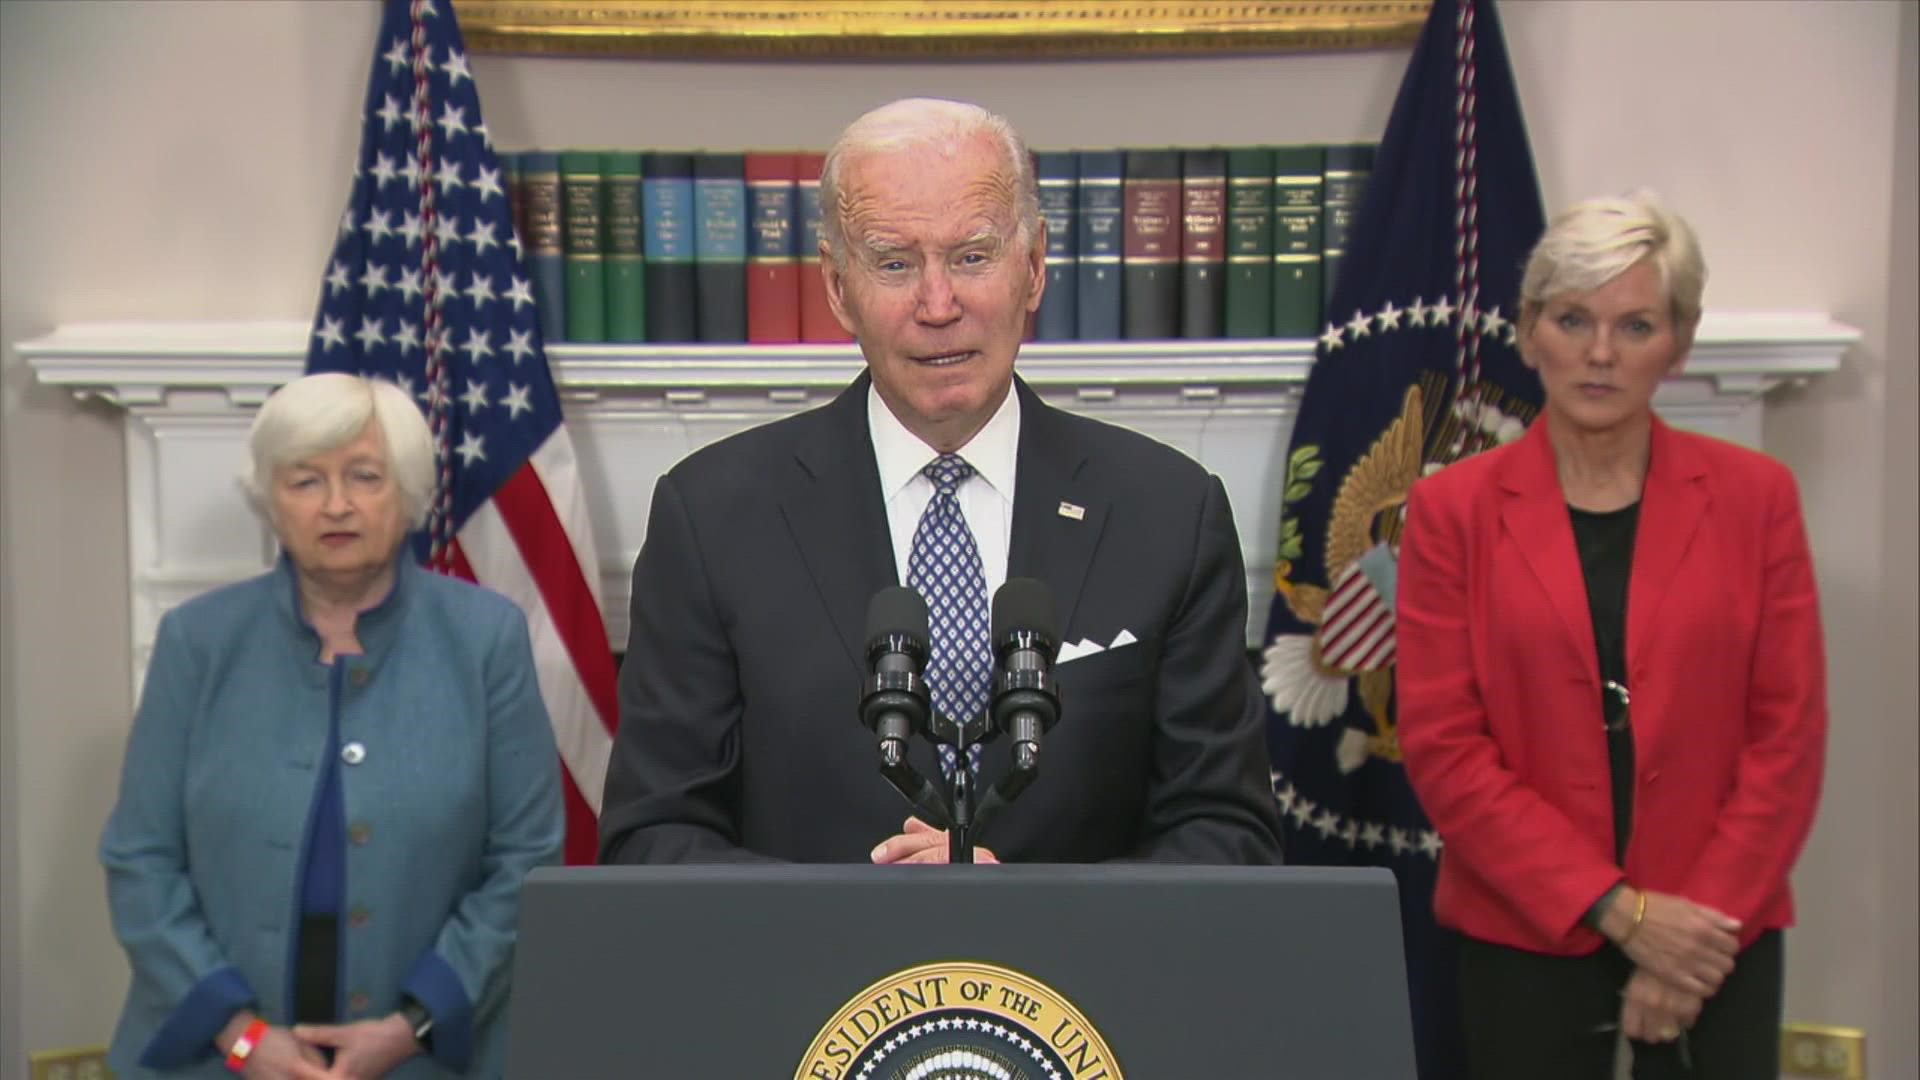 President Biden has issued an ultimatum to oil companies over high gas prices.